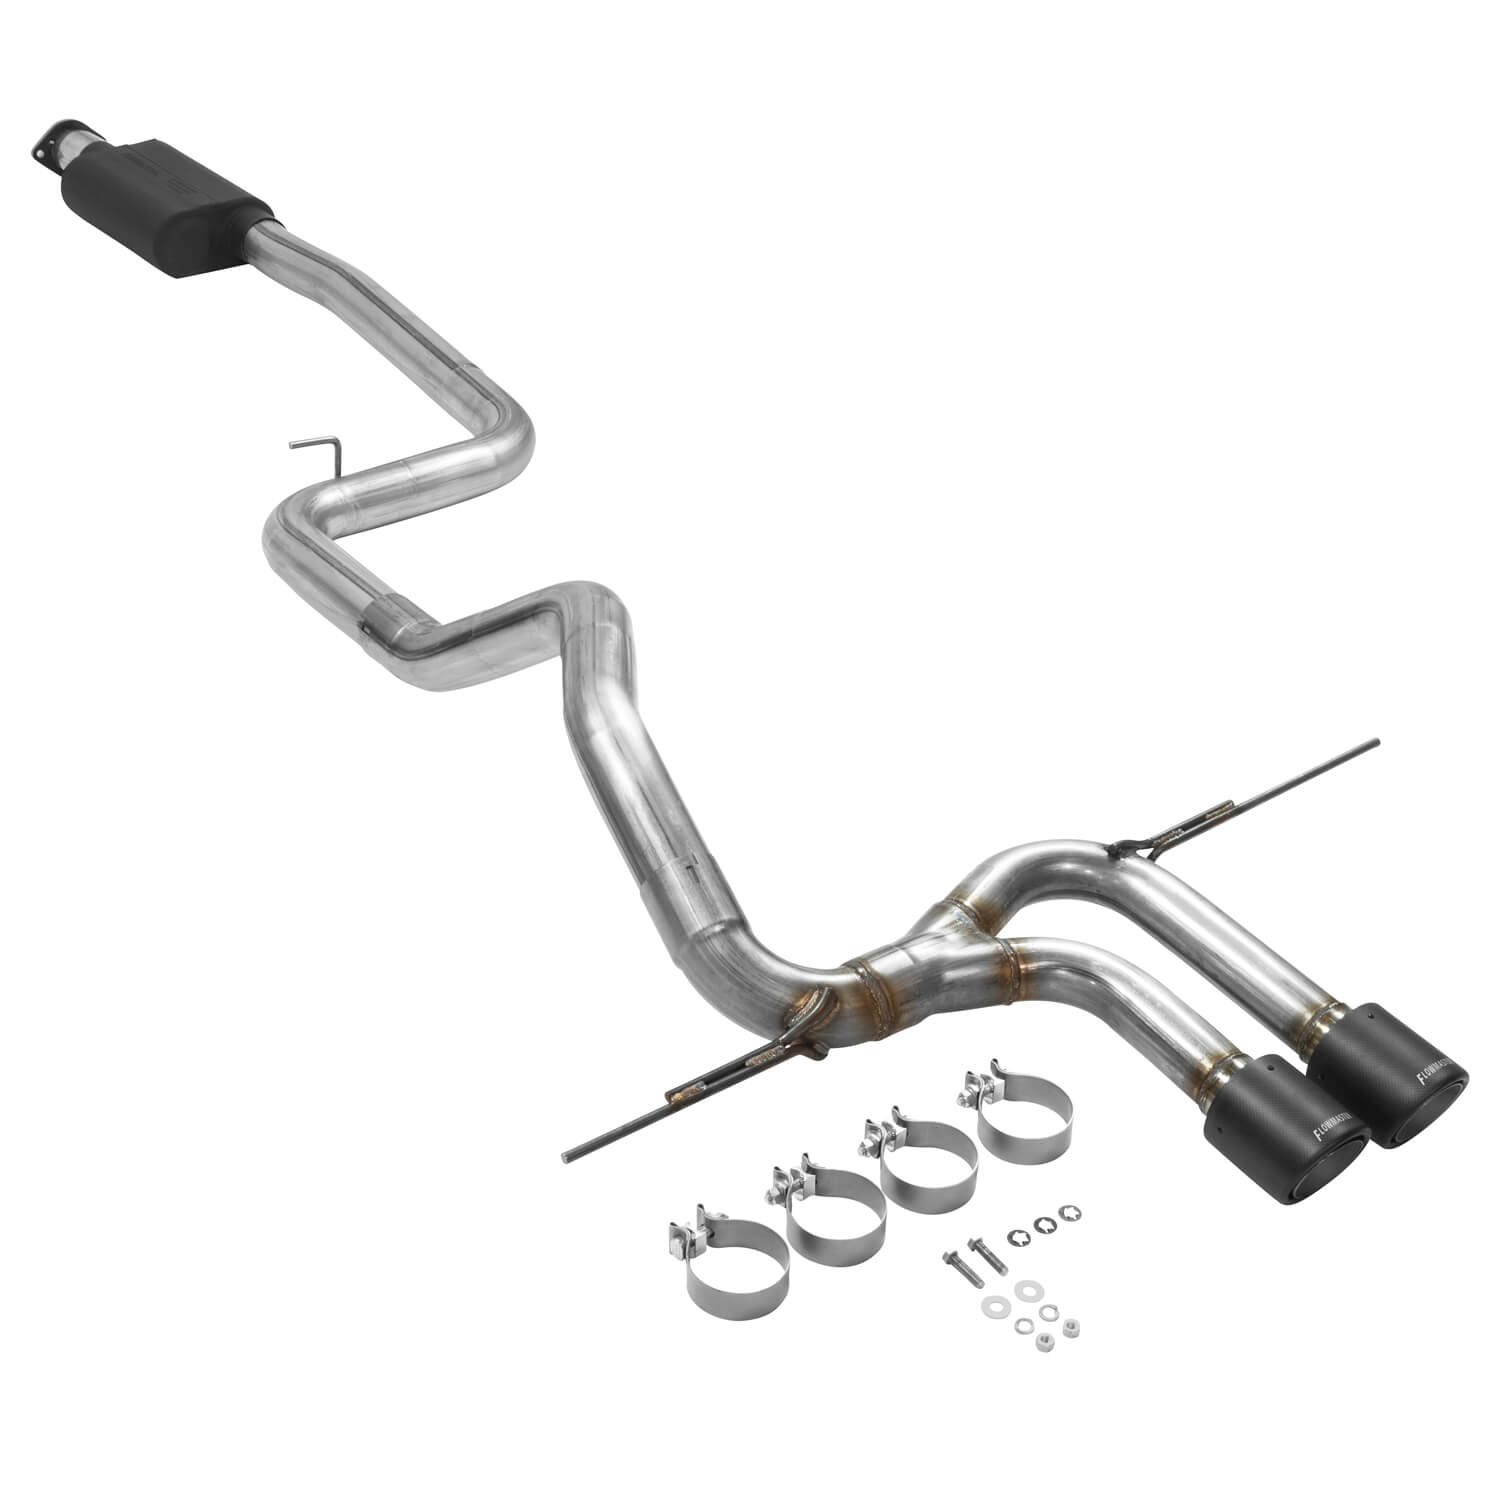 FLOWMASTER OUTLAW CAT-BACK EXHAUST SYSTEM 2013-2018 Ford Focus ST with the 2.0L turbocharged engine.